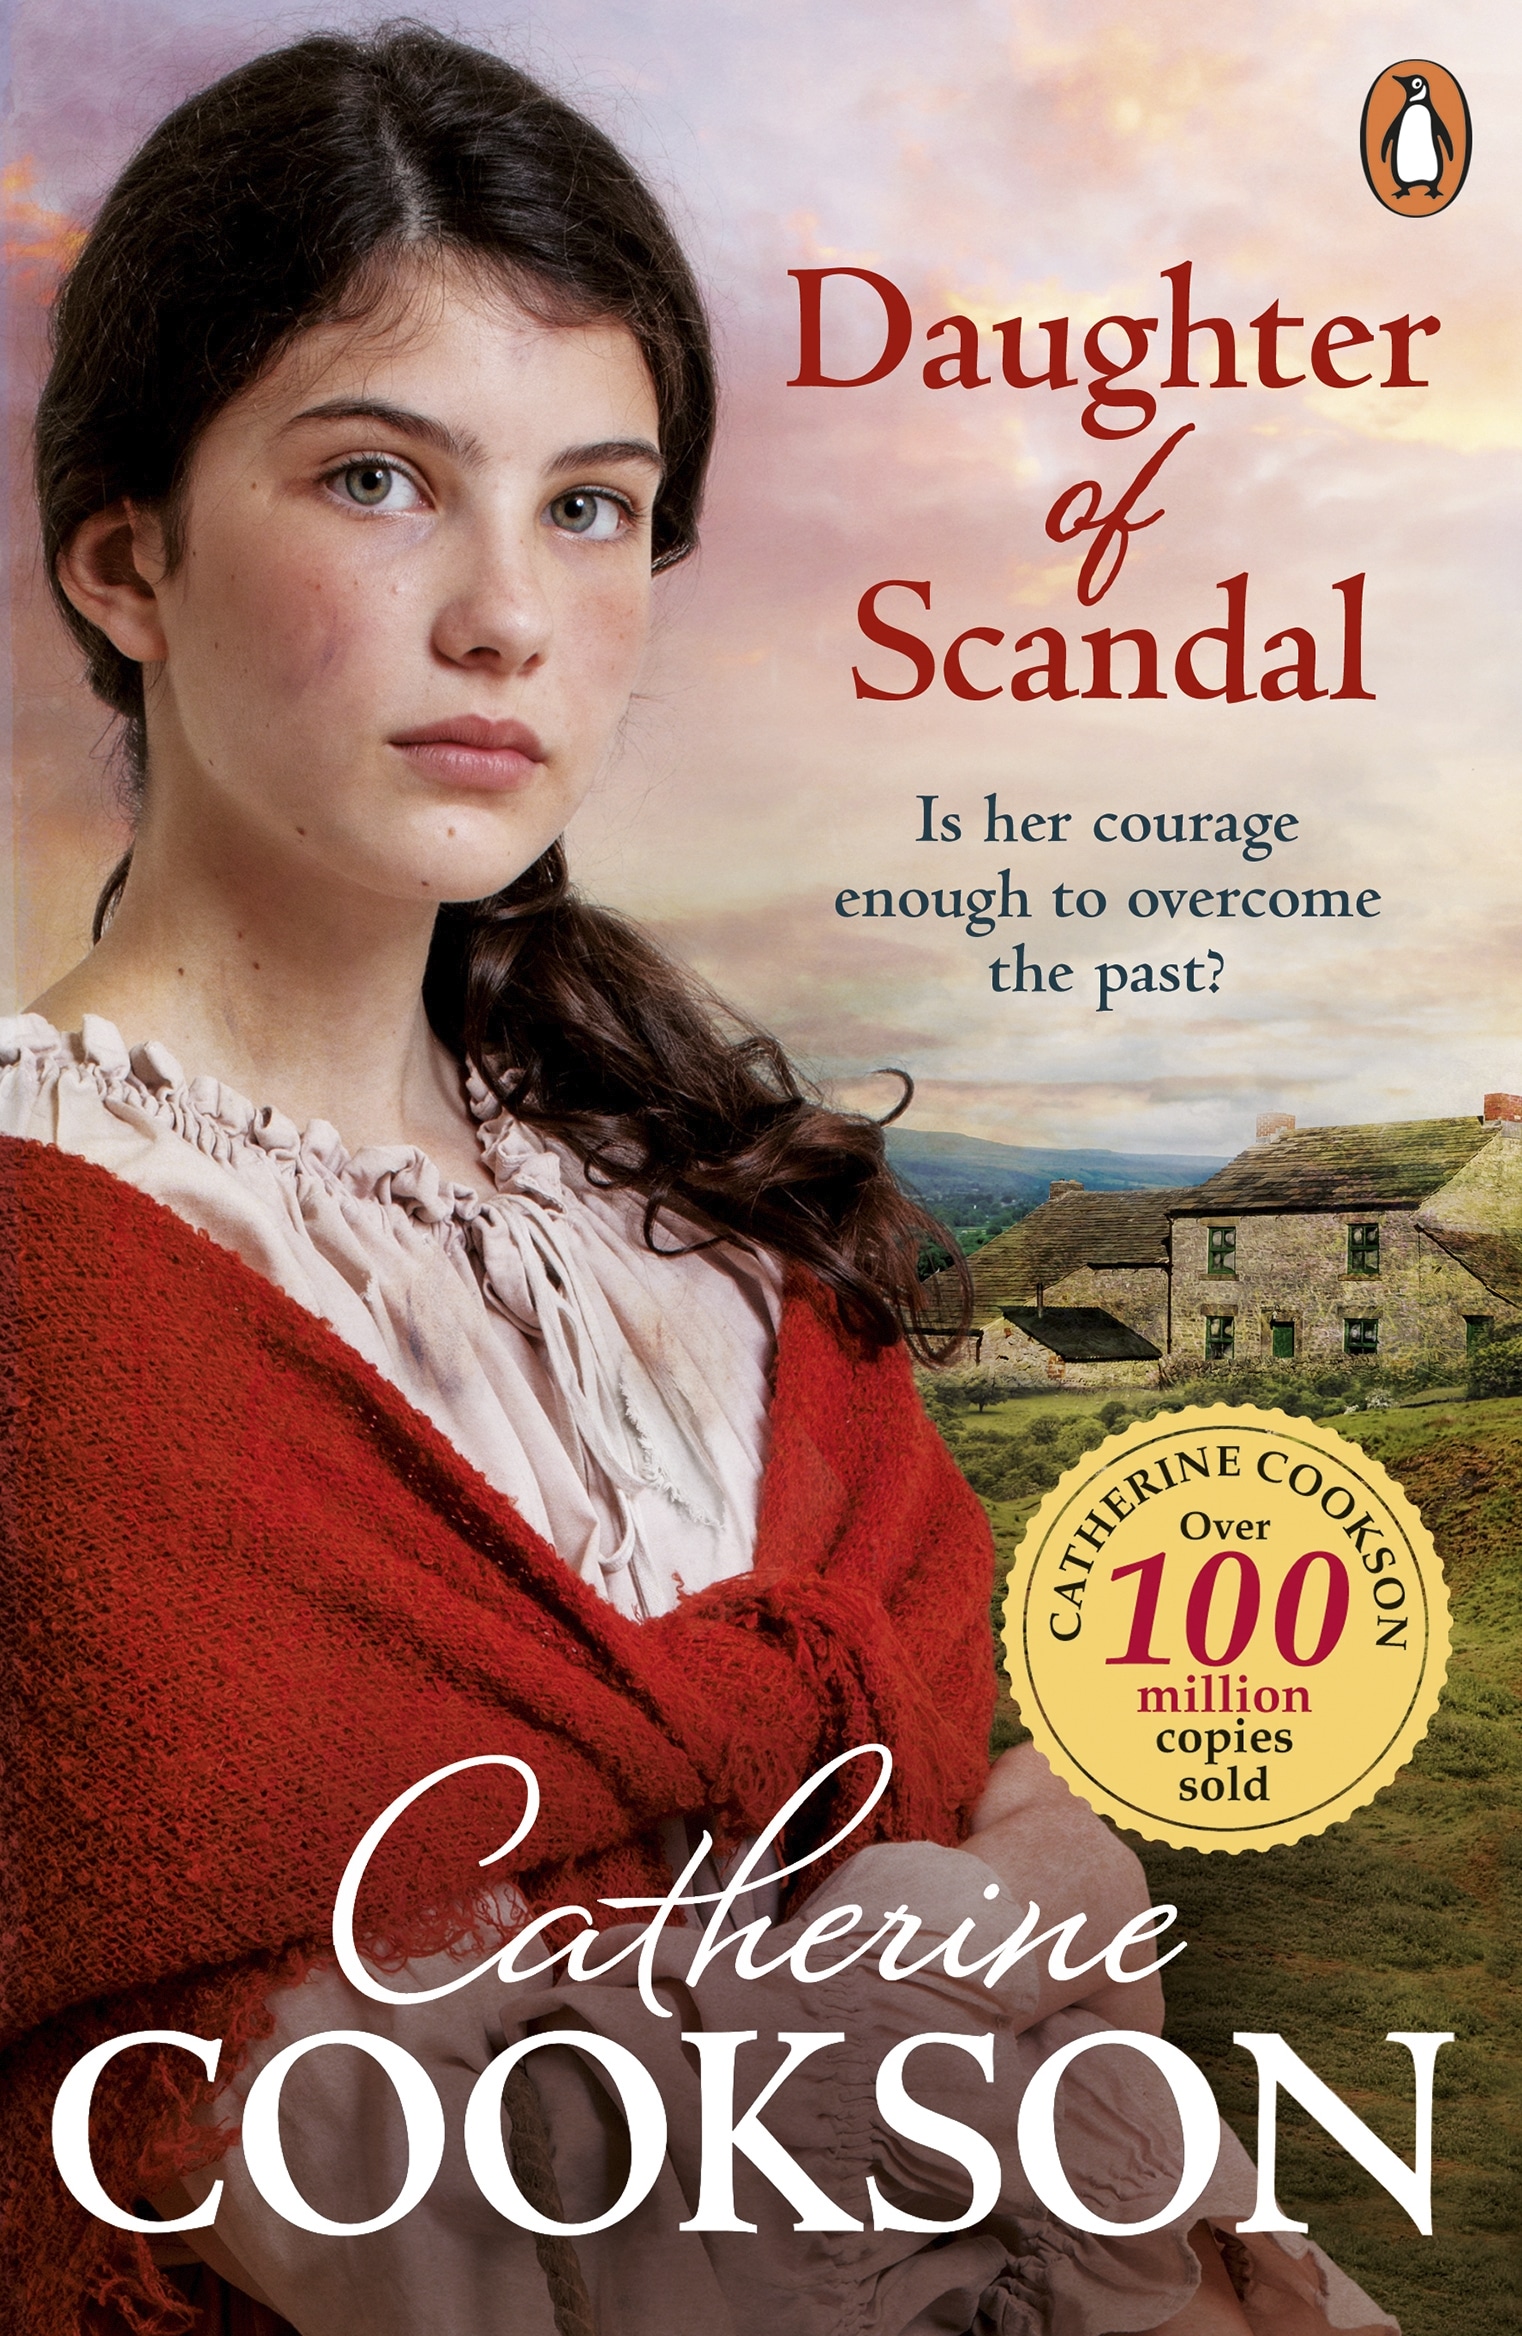 Book “Daughter of Scandal” by Catherine Cookson — November 25, 2021